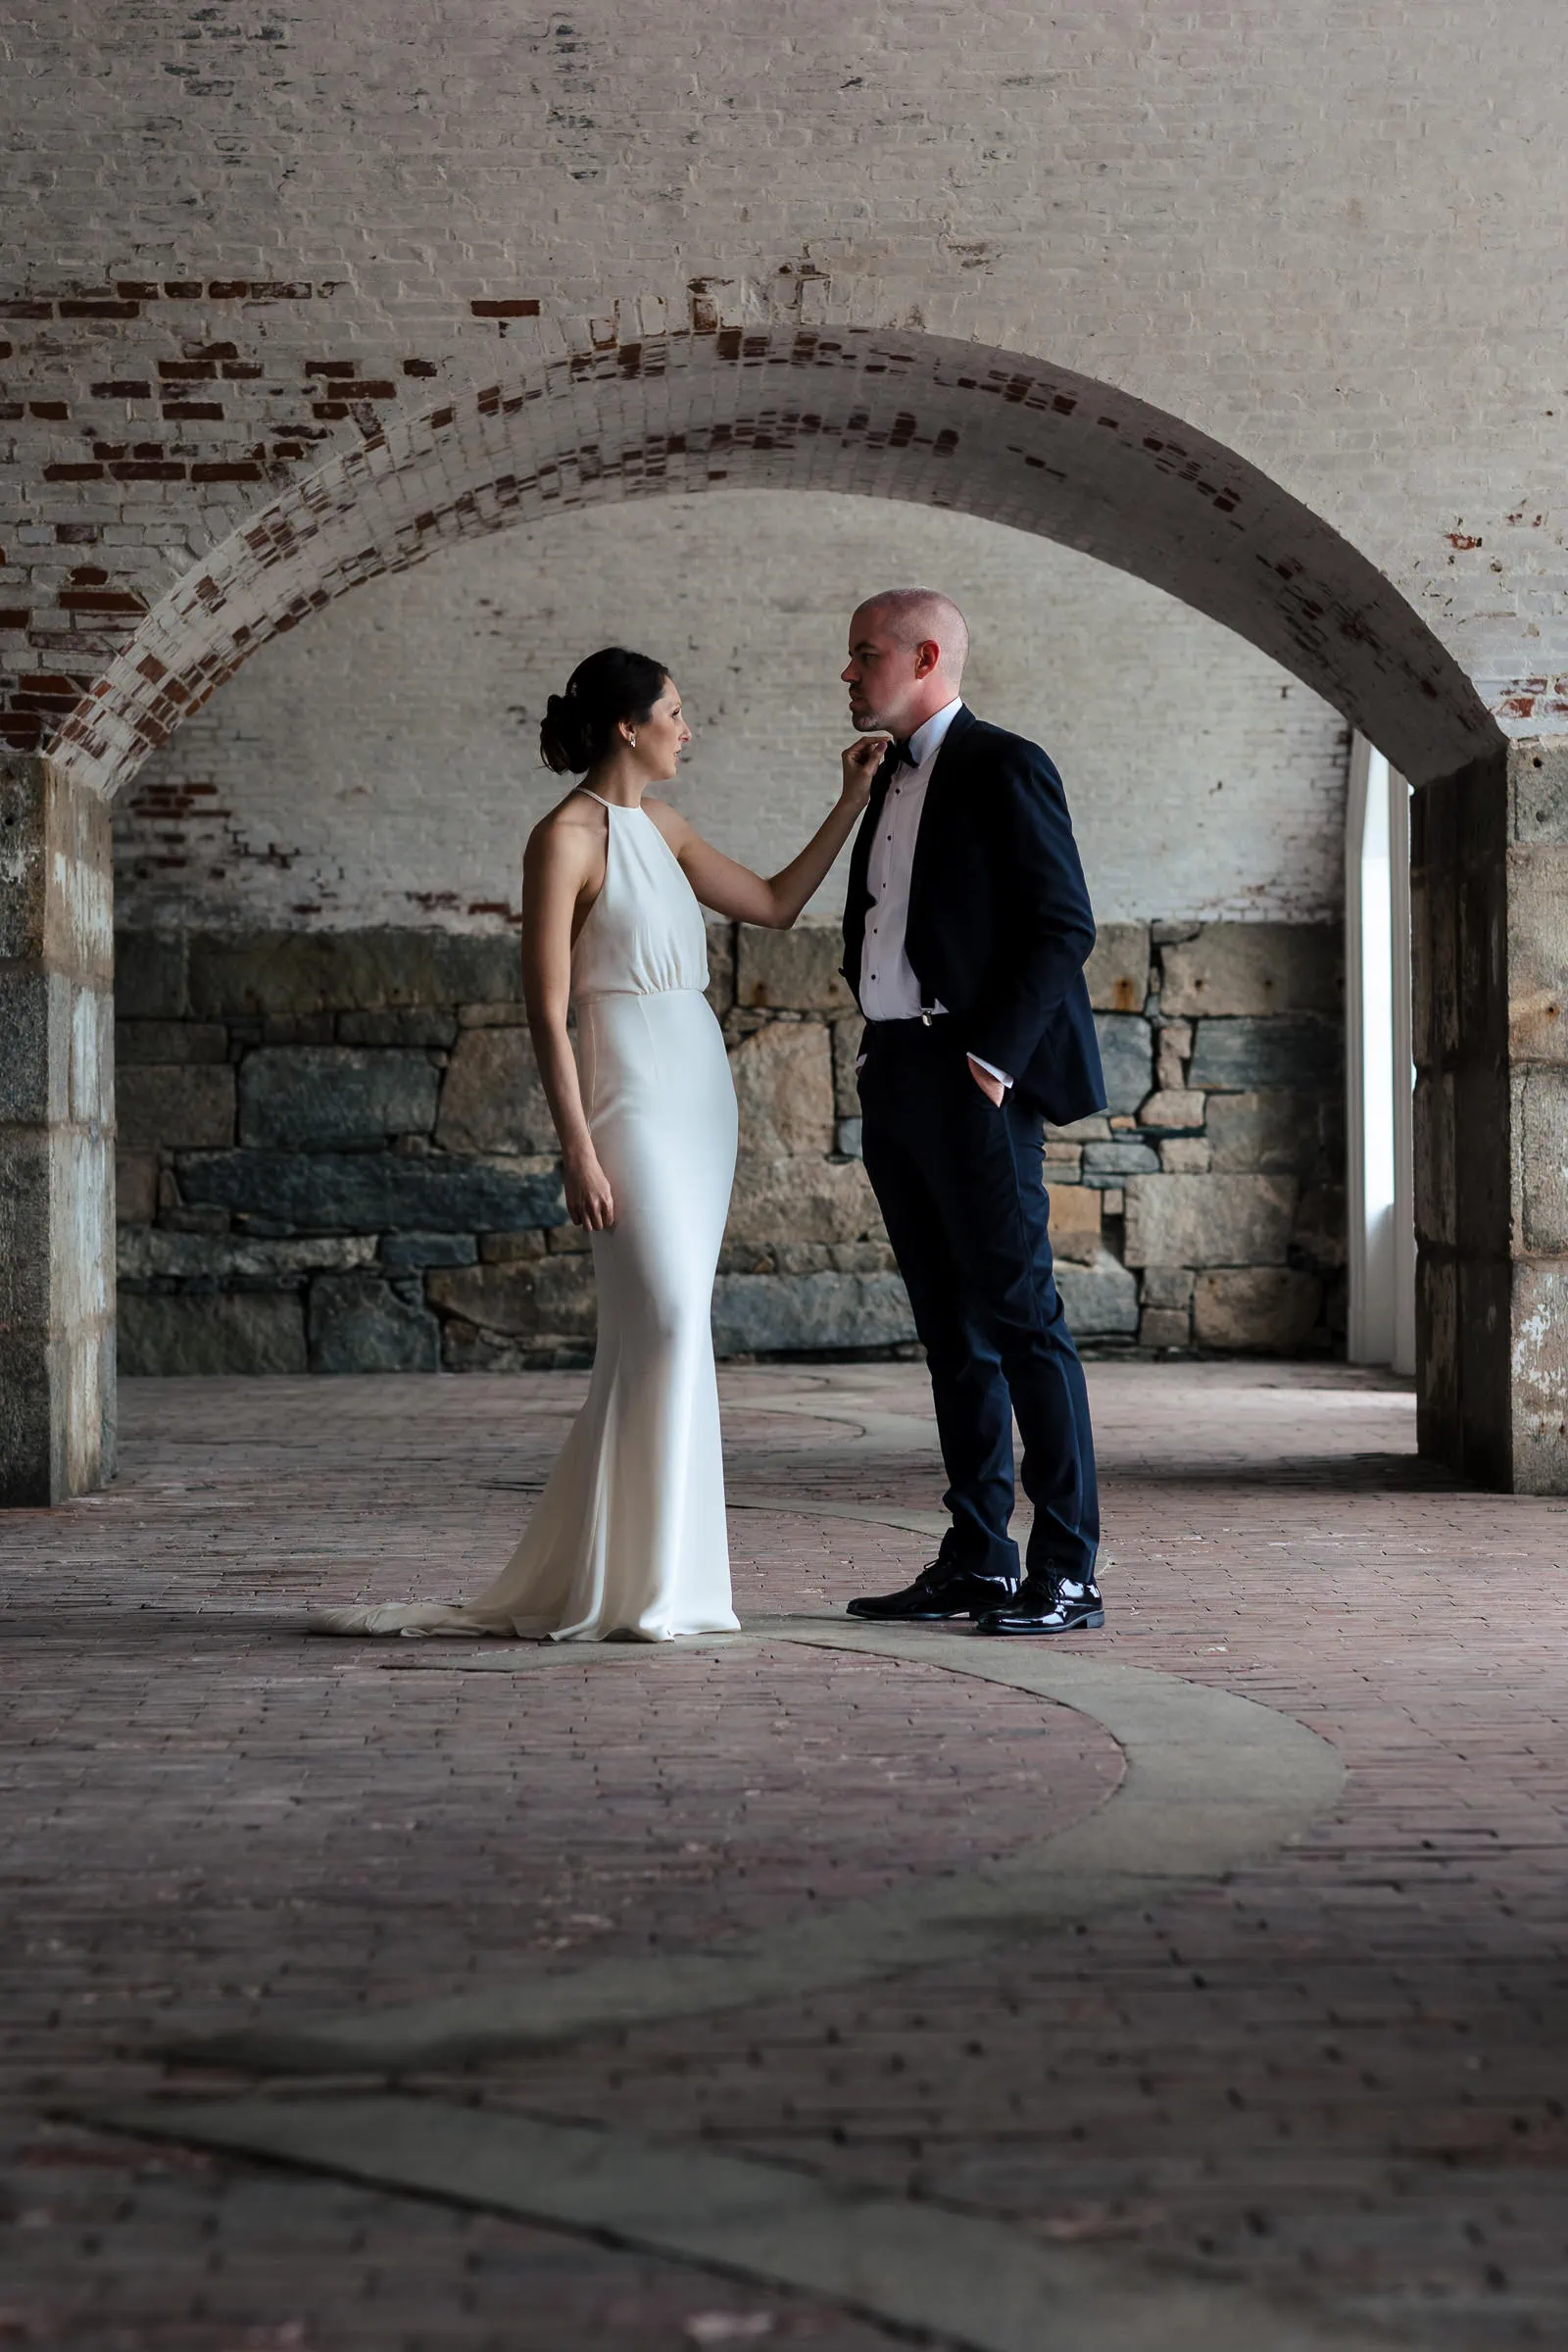 A bride in a white dress adjusts the tie of her groom in a black suit underneath a stone archway in a fort